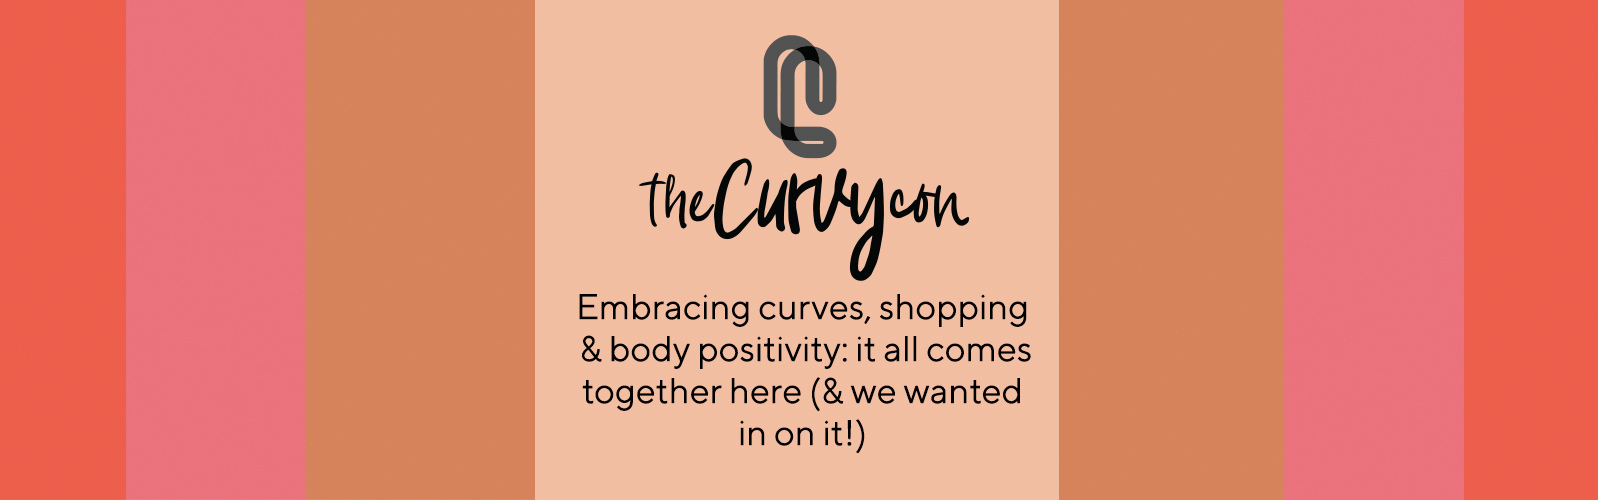 Embracing curves, shopping & body positivity: it all comes together here (& we wanted in on it!)